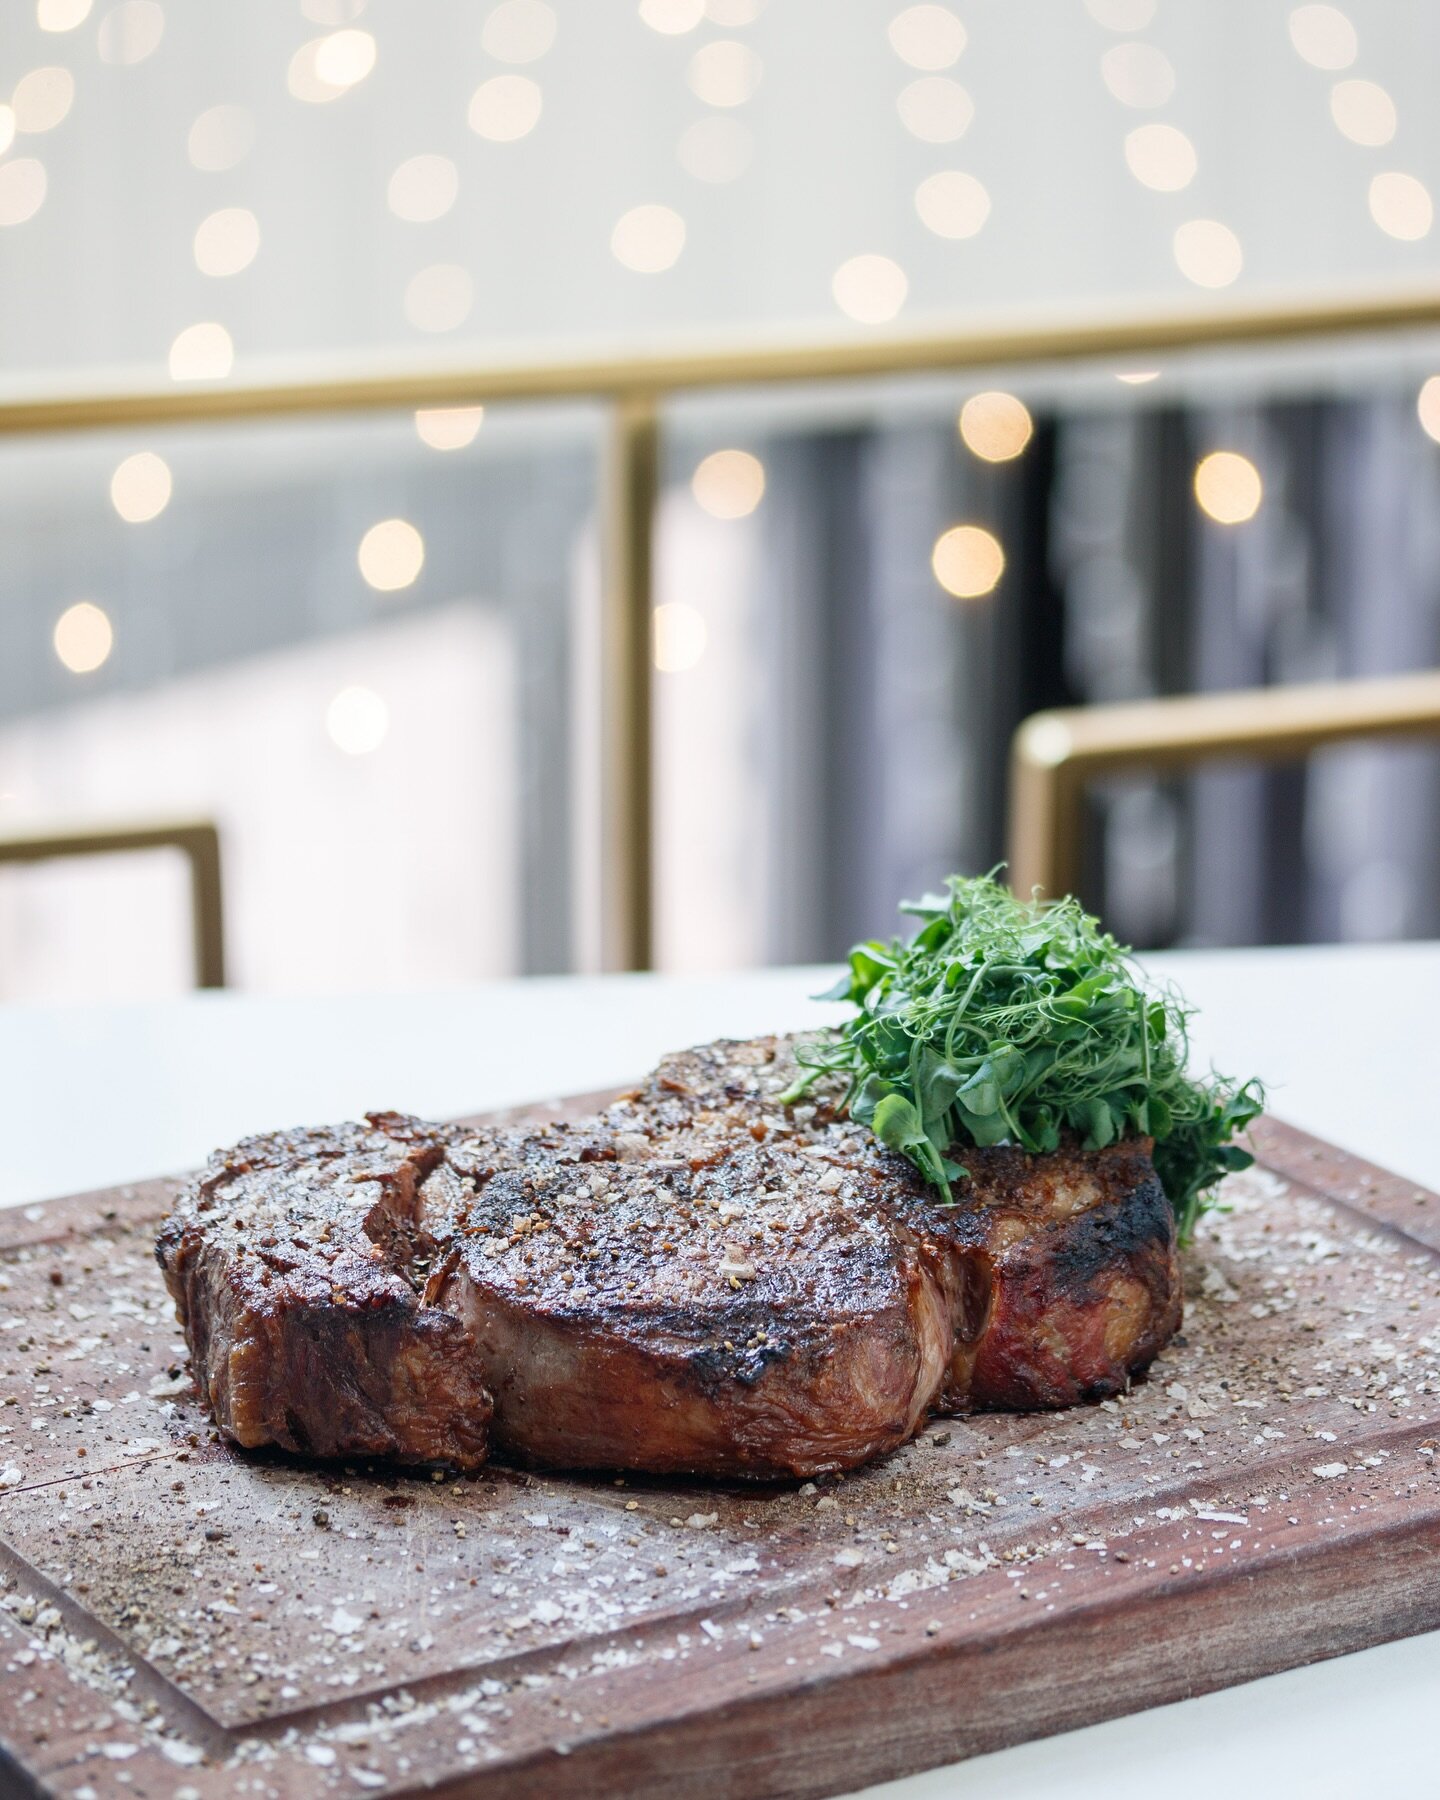 🌧️☔ April showers bring... sizzling steaks at Deacon&rsquo;s New South! 🔥✨ Let the rain pour outside while you cozy up indoors with our succulent dry-aged steaks, expertly crafted to perfection. 🥩💫 

Whether it&rsquo;s drizzling or downpouring, o